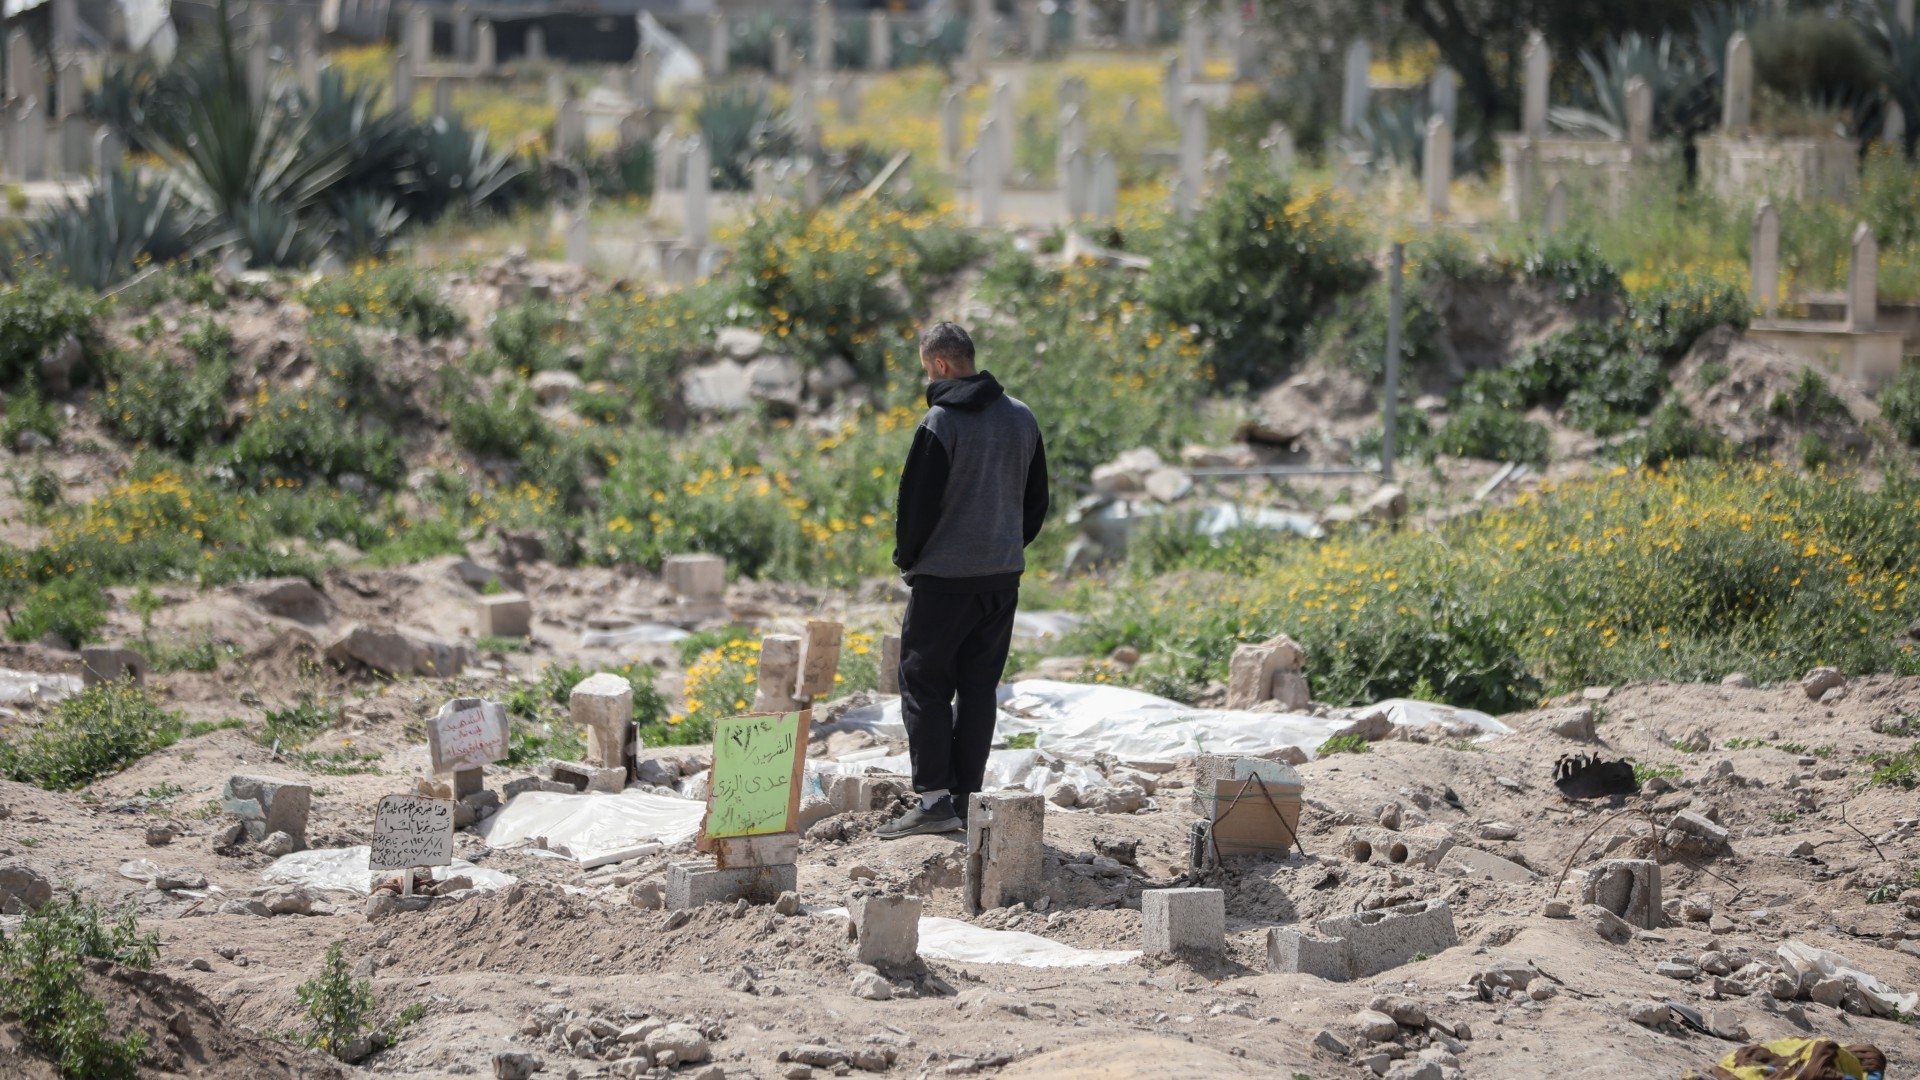 Israel has killed more than 33,000 Palestinians, more than two thirds of them women and children. In this photo, a Palestinian man walk through a cemetery in Gaza City to find the resting places of his loved ones (MEE/Mohammed al-Hajjar)